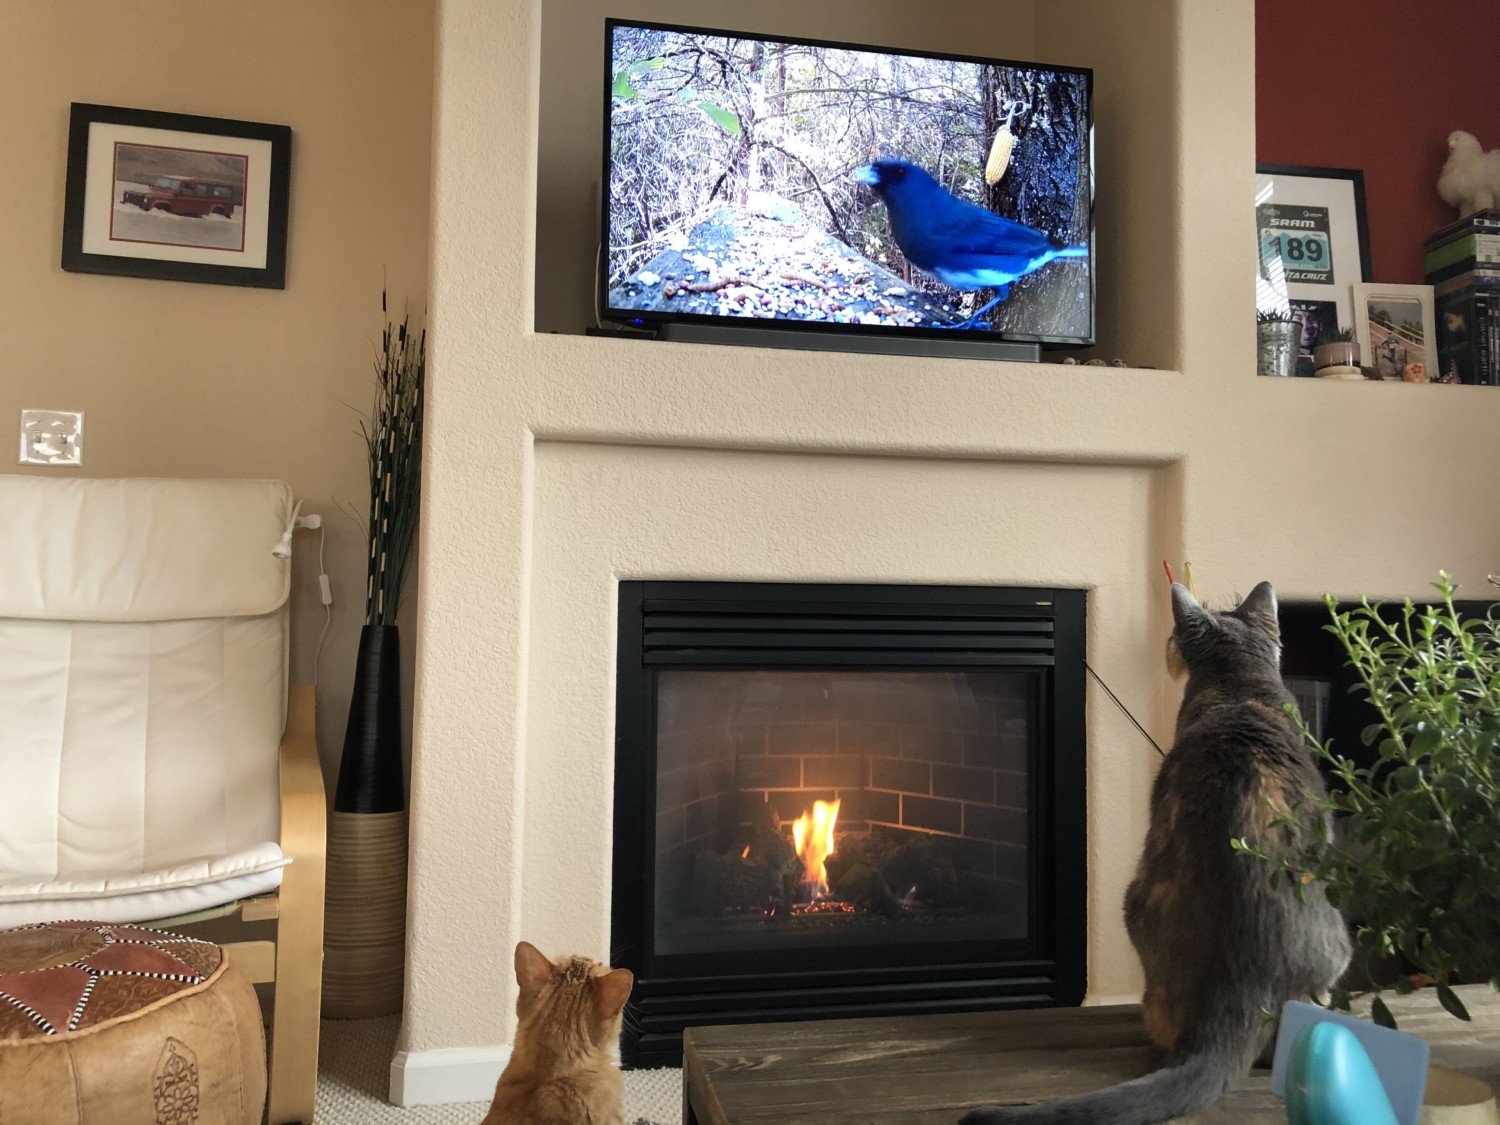 How to Keep Cat from Knocking Over TV- 7 Ways for Doing It